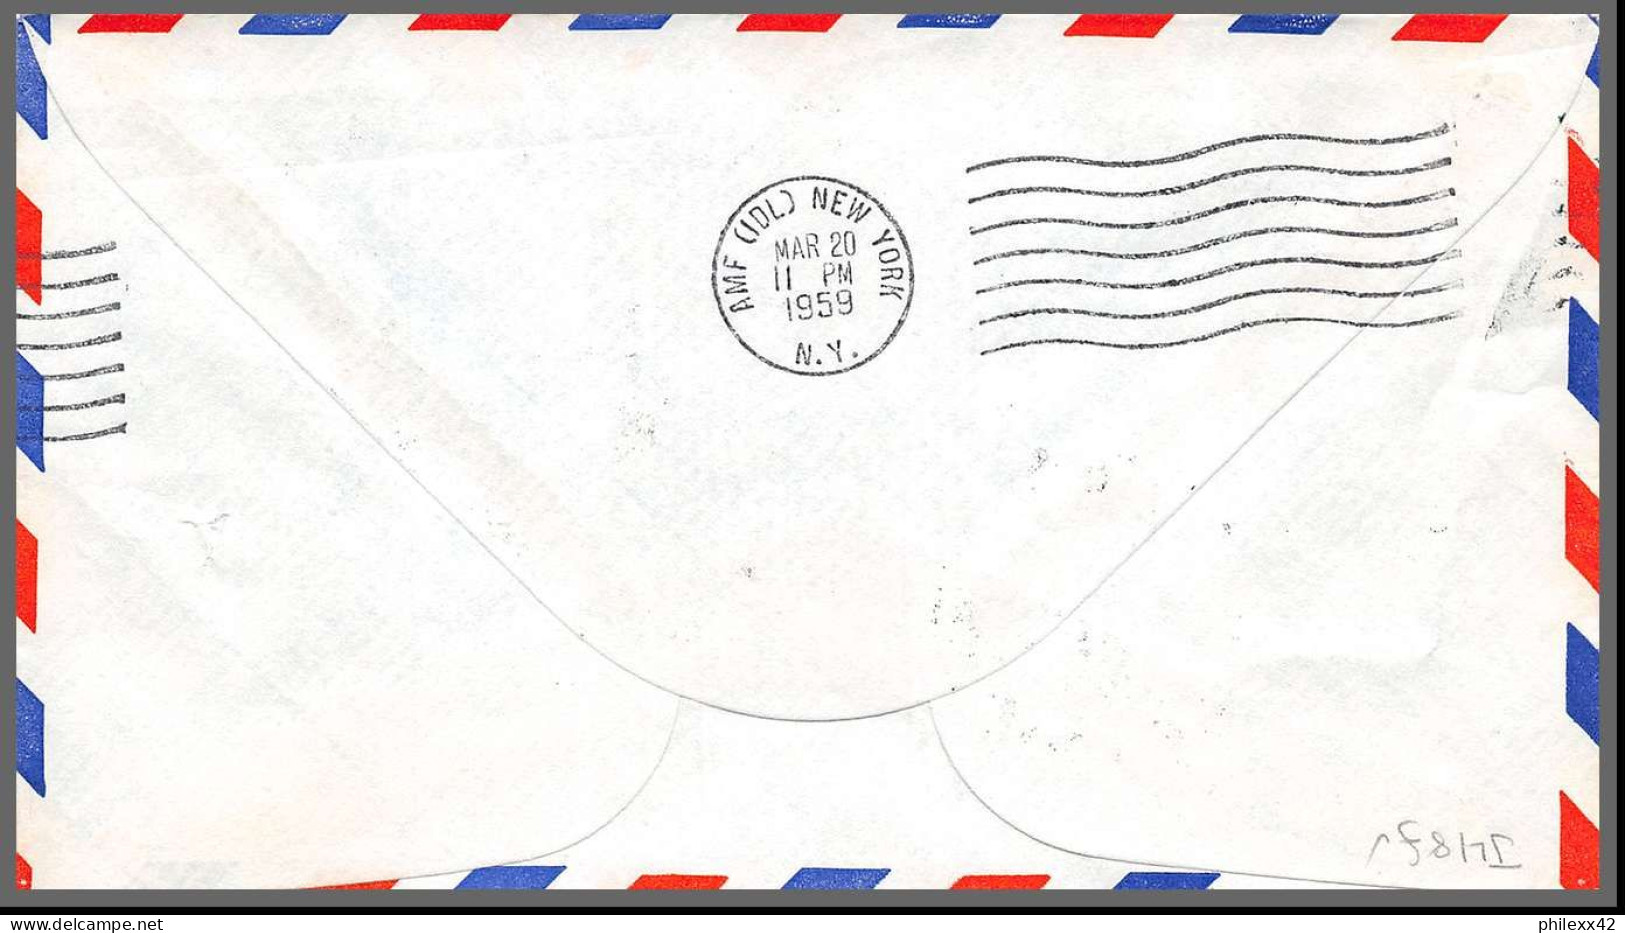 12308 Am 2 First Jet Service San Francisco To New York 20/3/1959 Premier Vol First Flight Lettre Airmail Cover Usa  - 2c. 1941-1960 Lettres